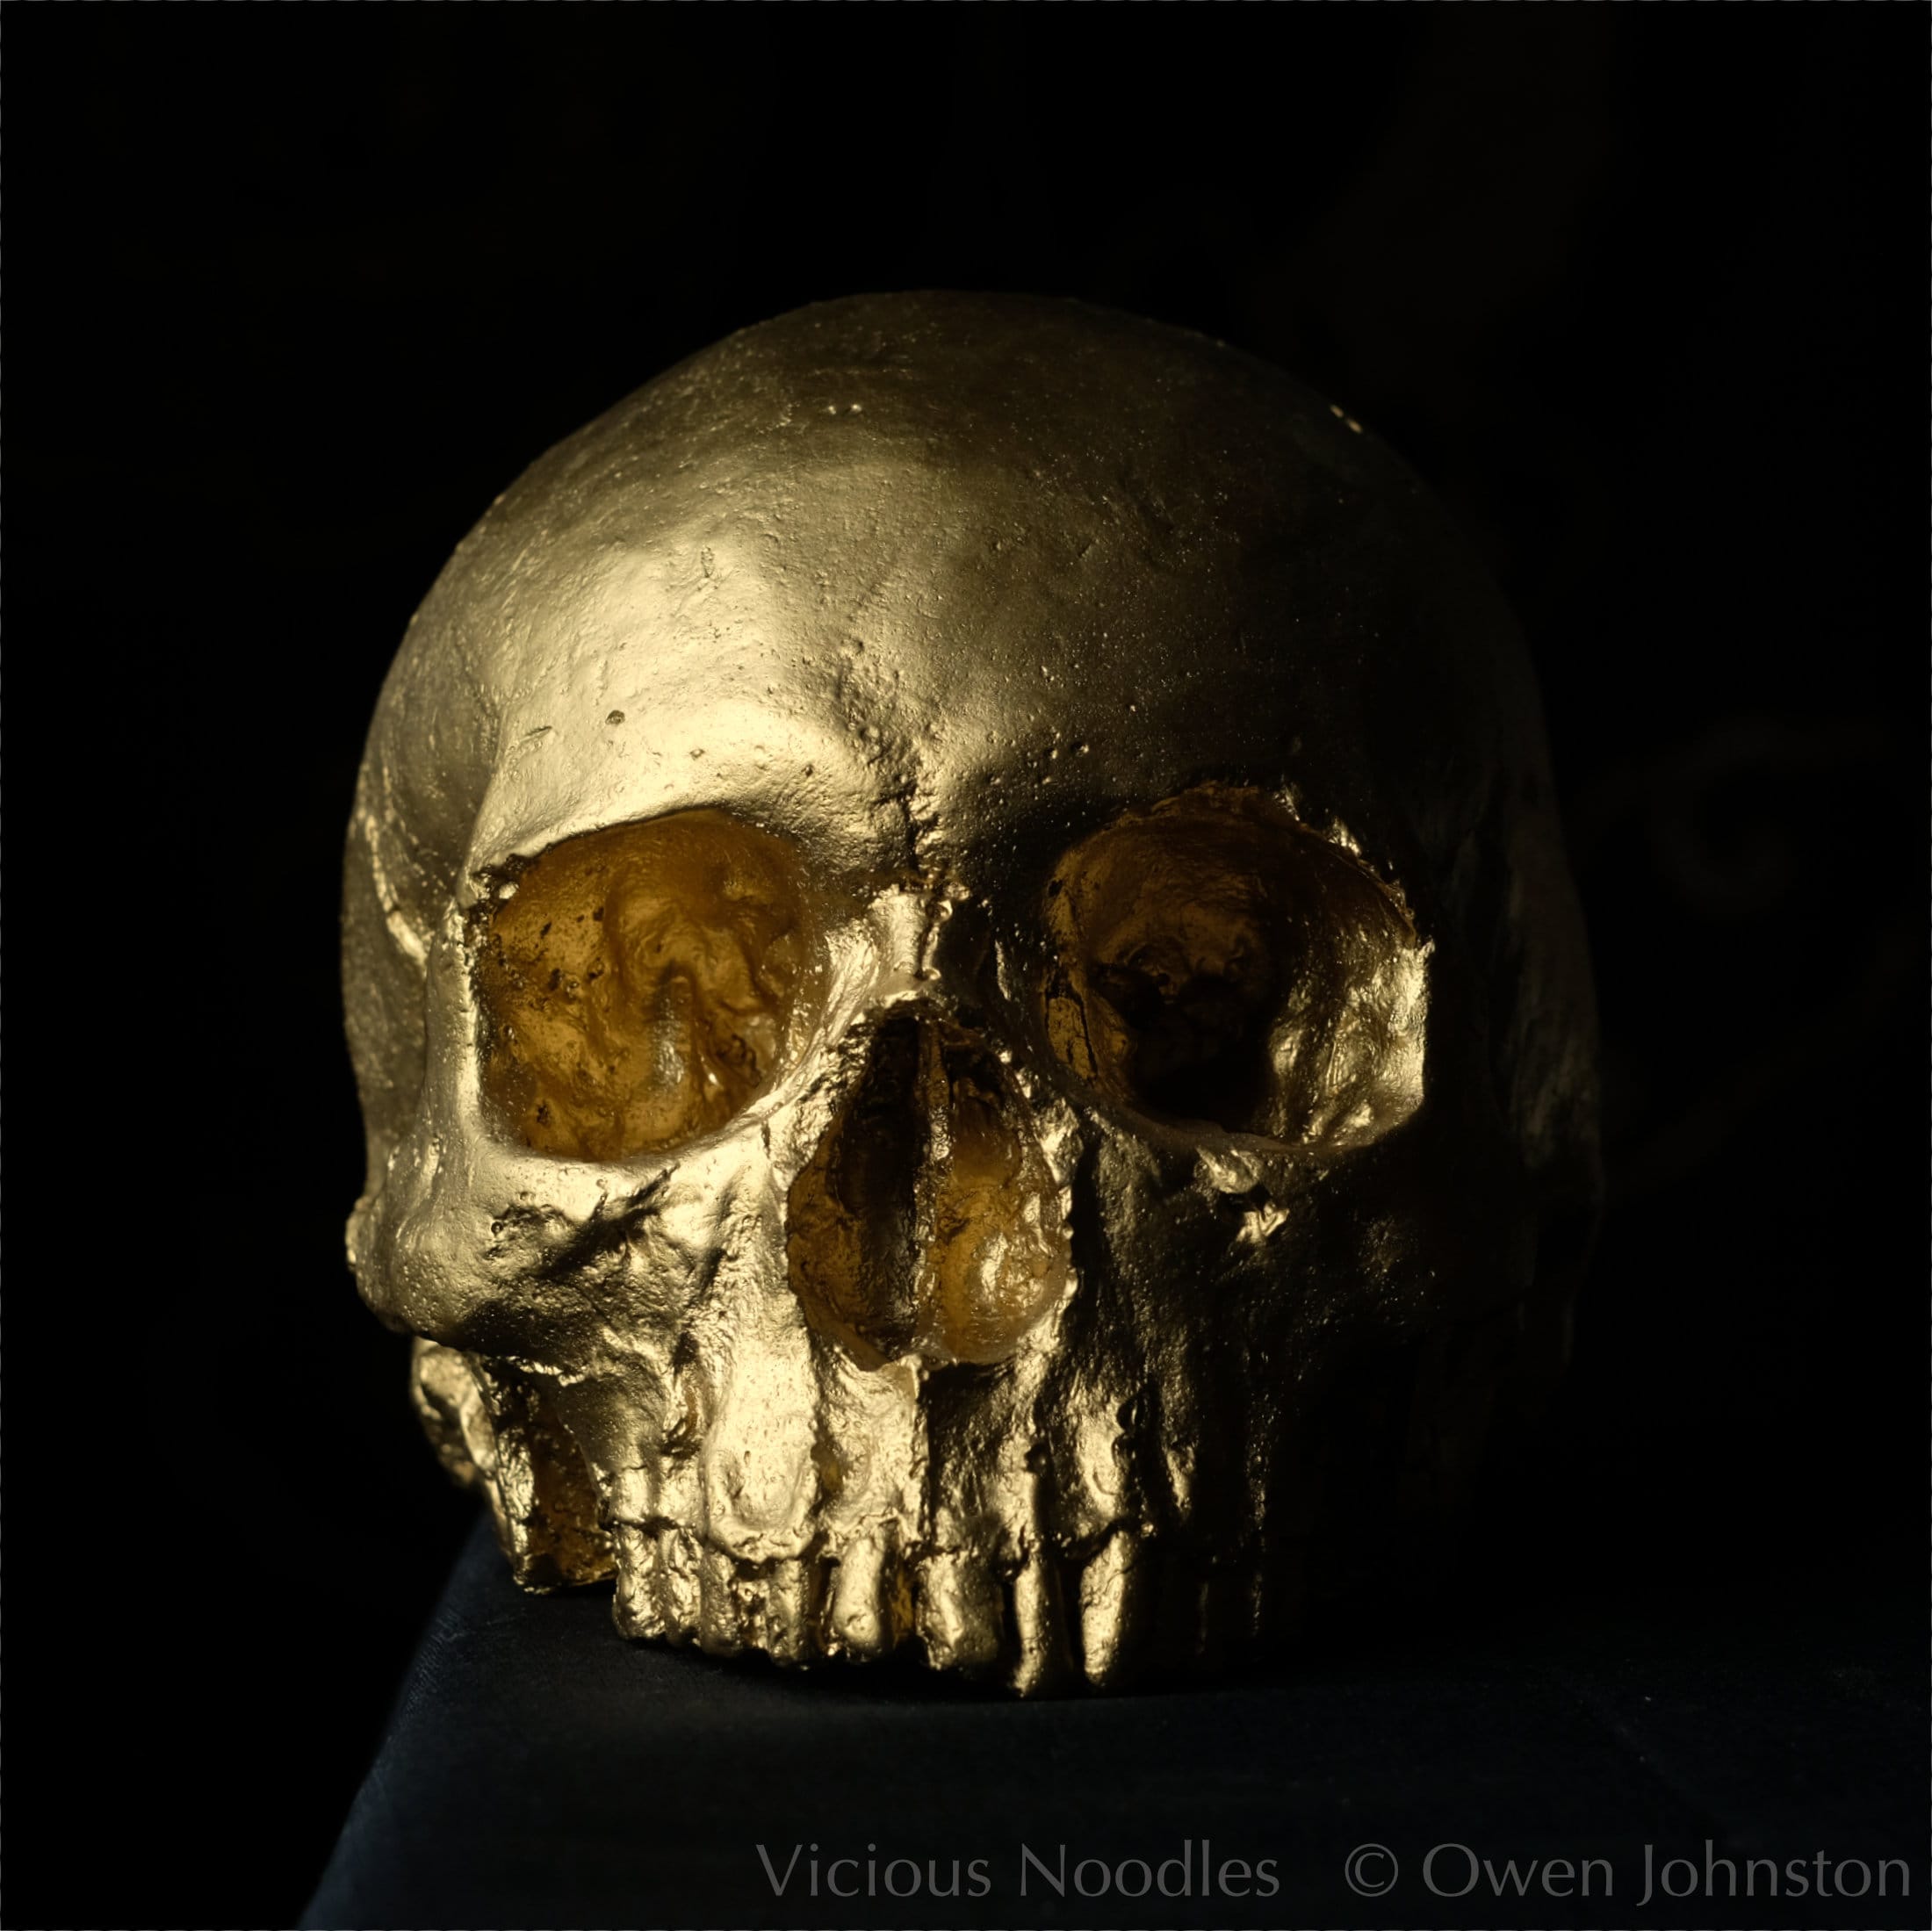 SKULL CANDLE HOLDER polished Bone Full Size Human Skull Candle Holder Made  From Plaster of Paris, Painted for a Weathered Appearance 